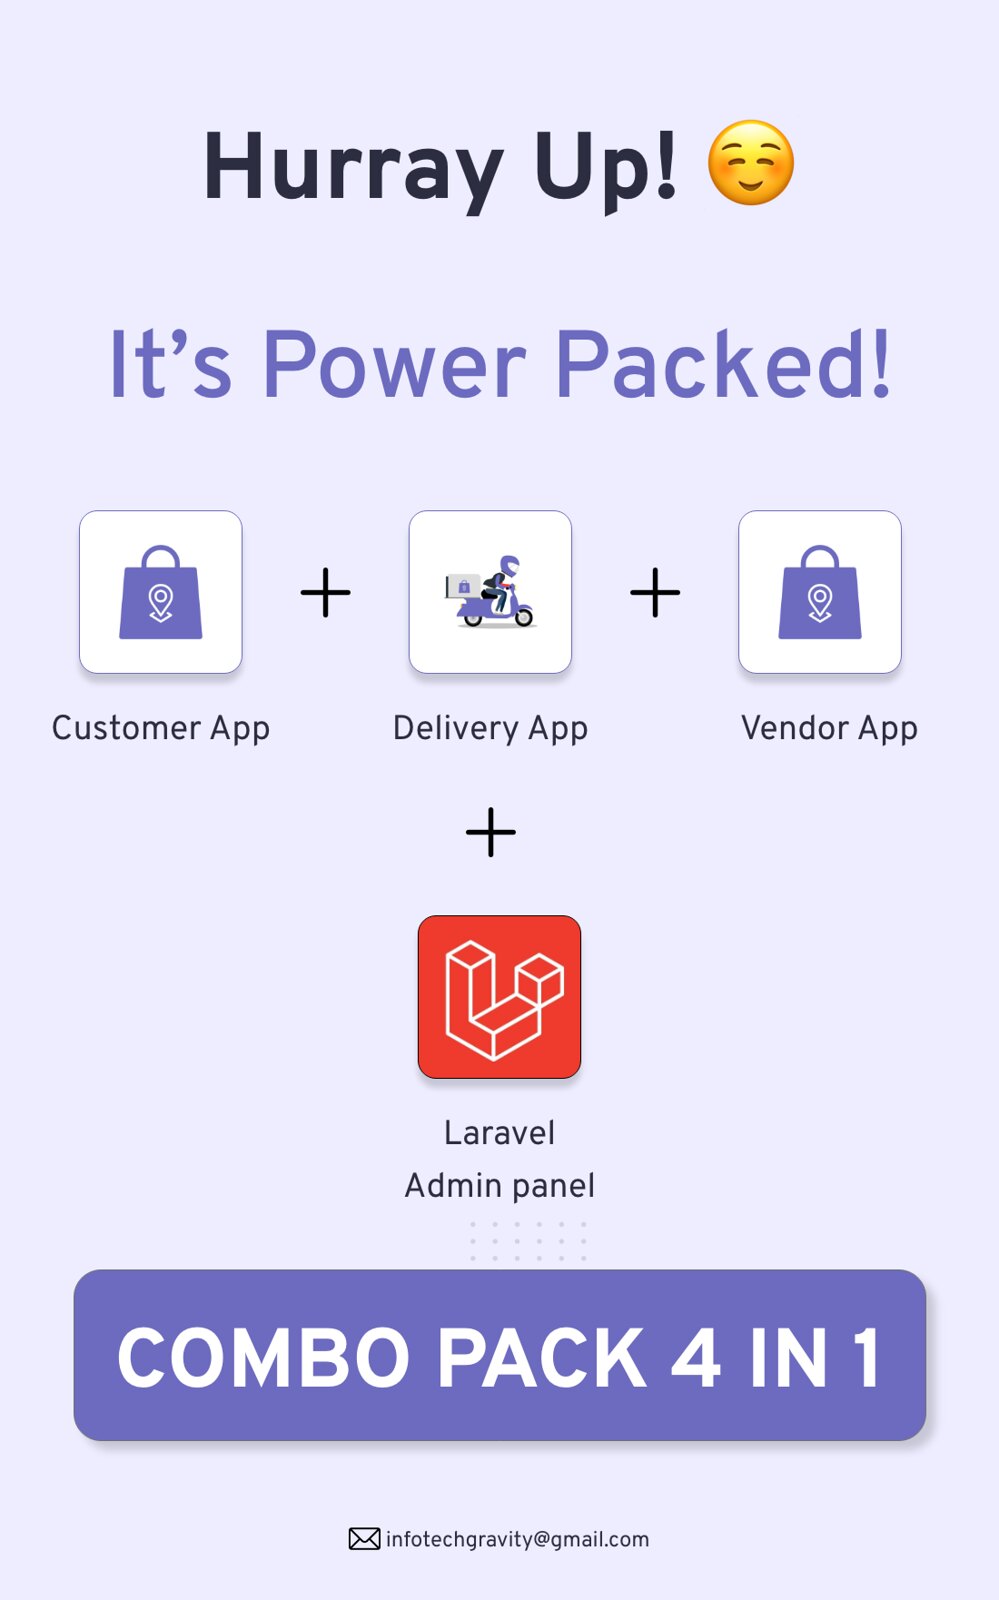 Multi-Branch Restaurant - Android User + Delivery Boy + Vendor Apps With Laravel Admin Panel - 4